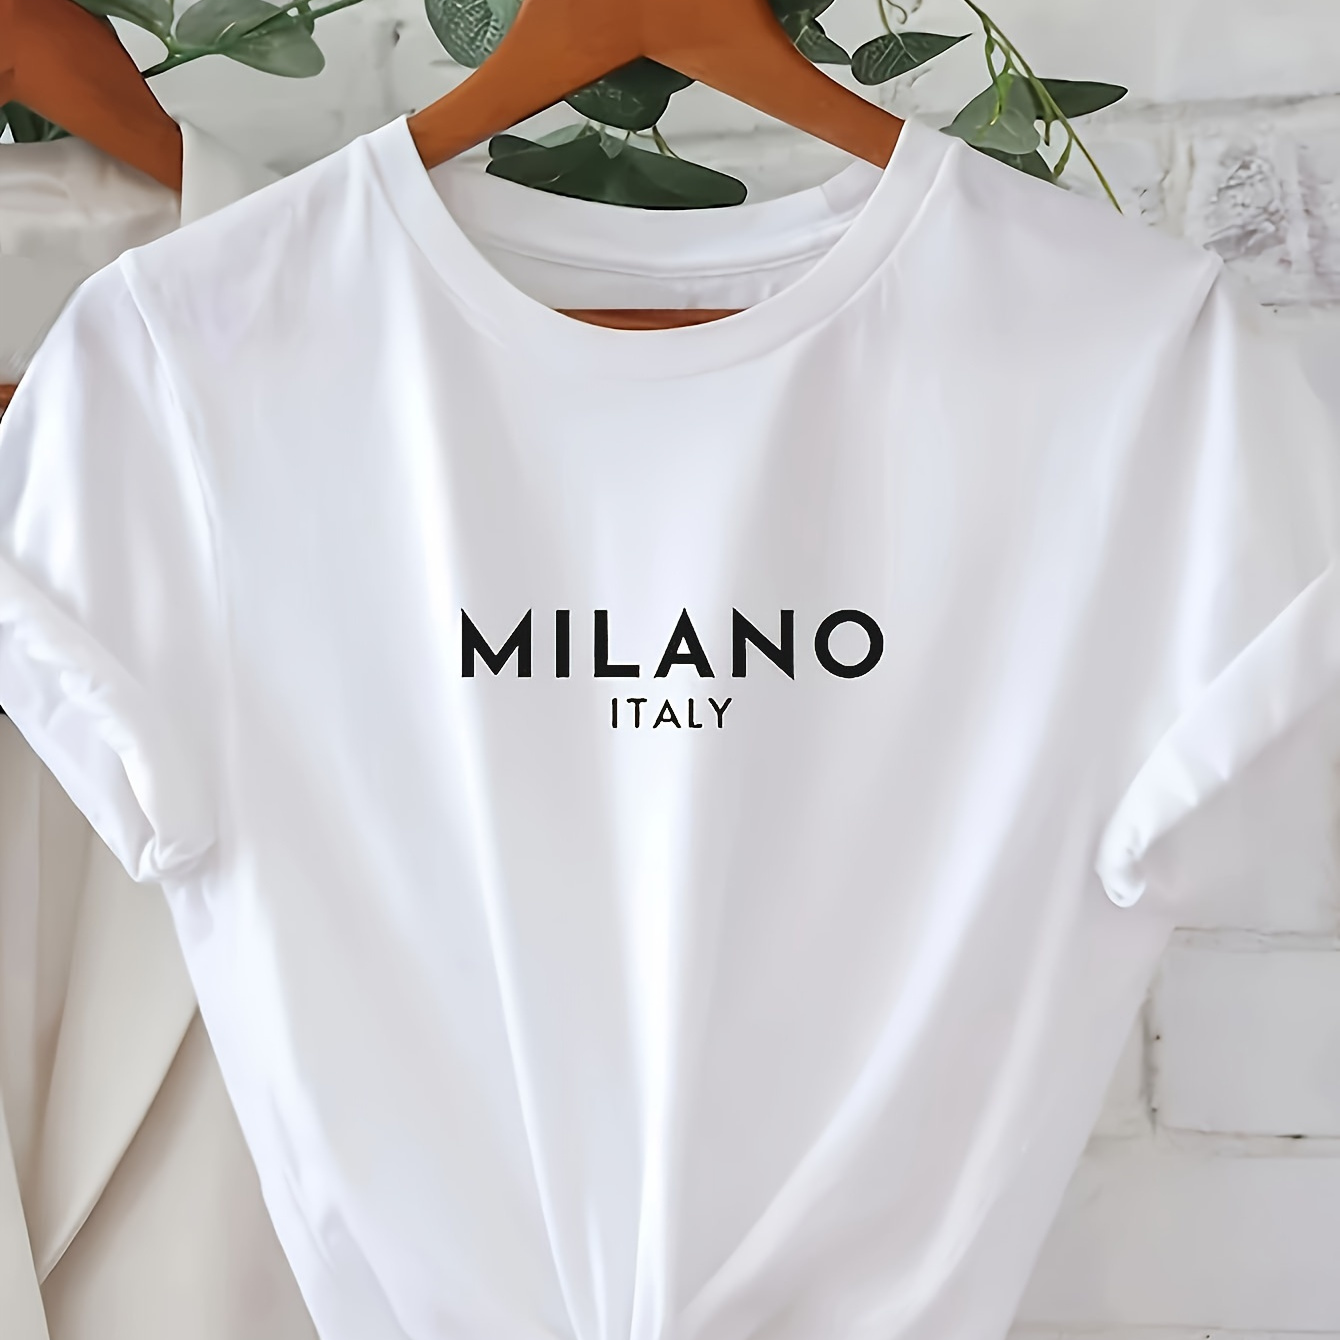 

Milano Letter Print T-shirt, Casual Crew Neck Short Sleeve Top For Spring & Summer, Women's Clothing